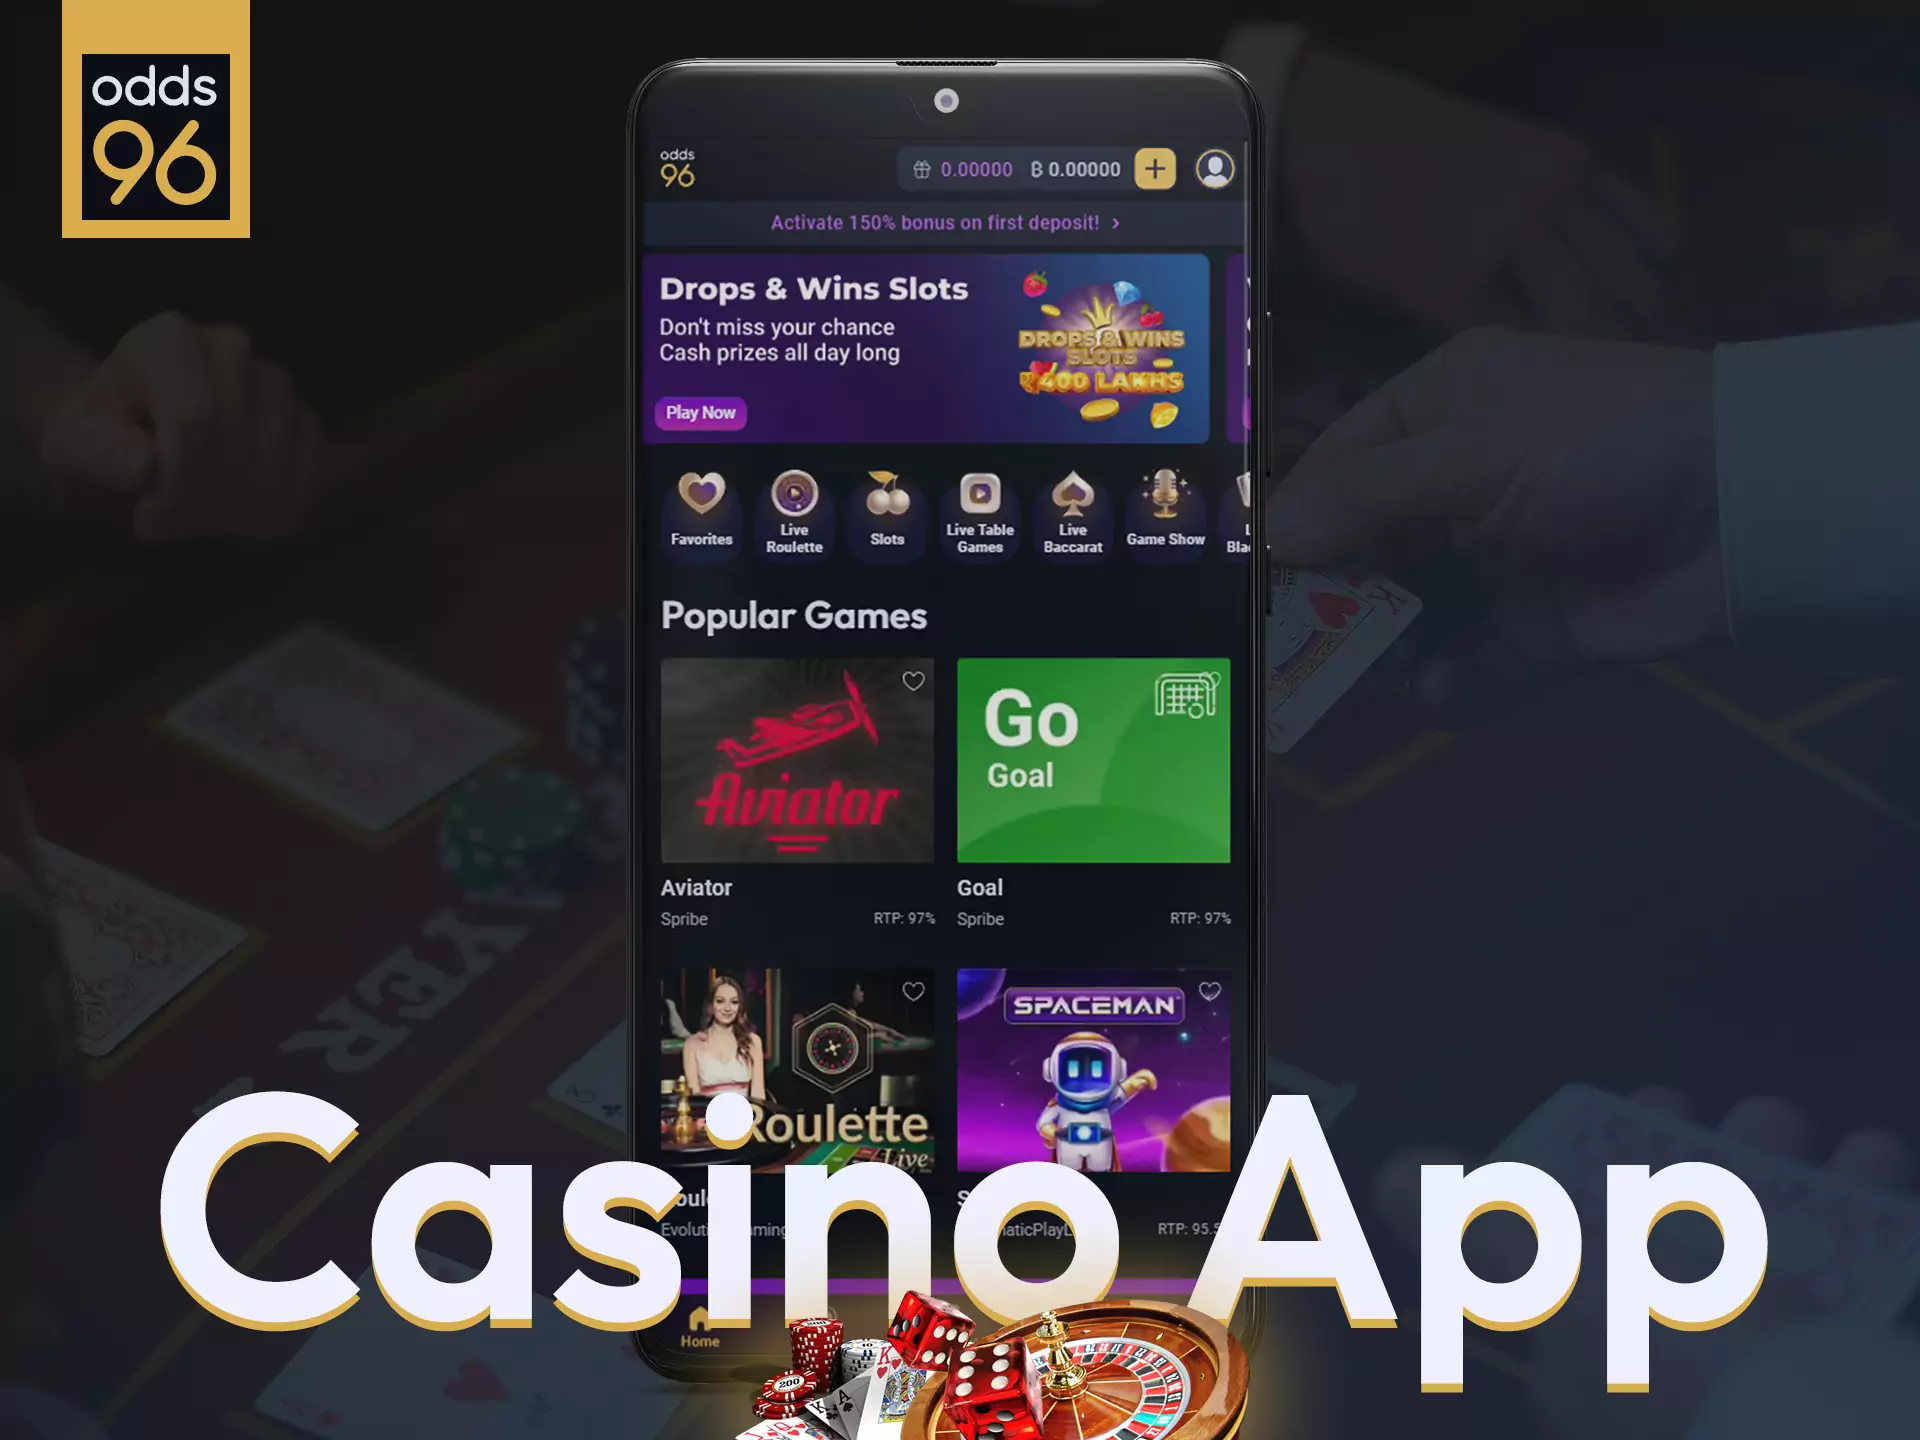 Try the casino app in Odds96, play with pleasure.